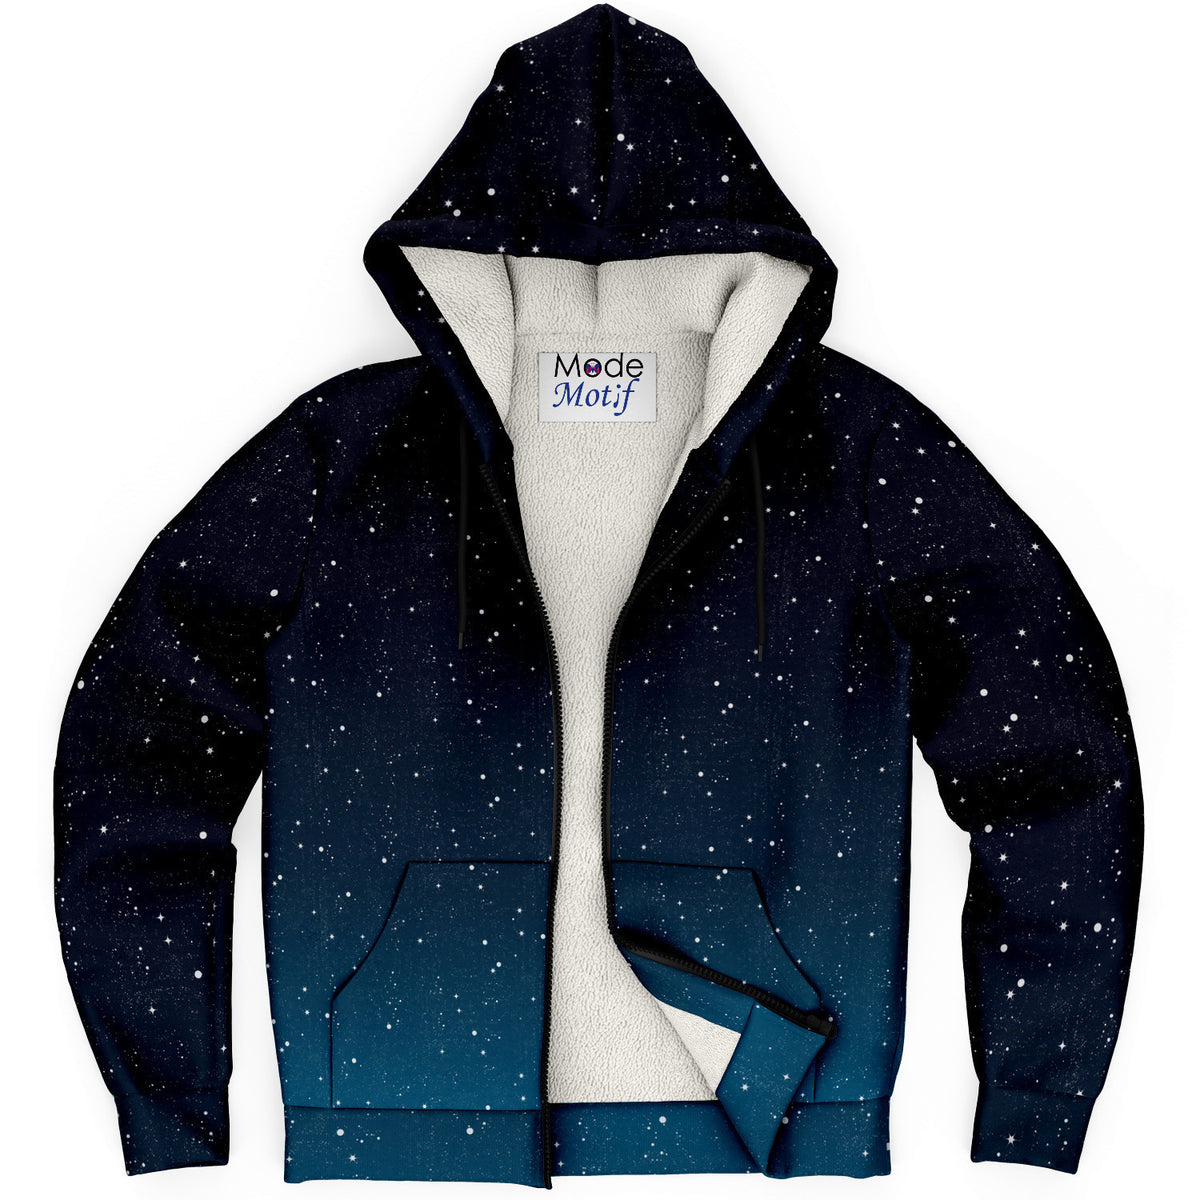 Space Ombre Jacket